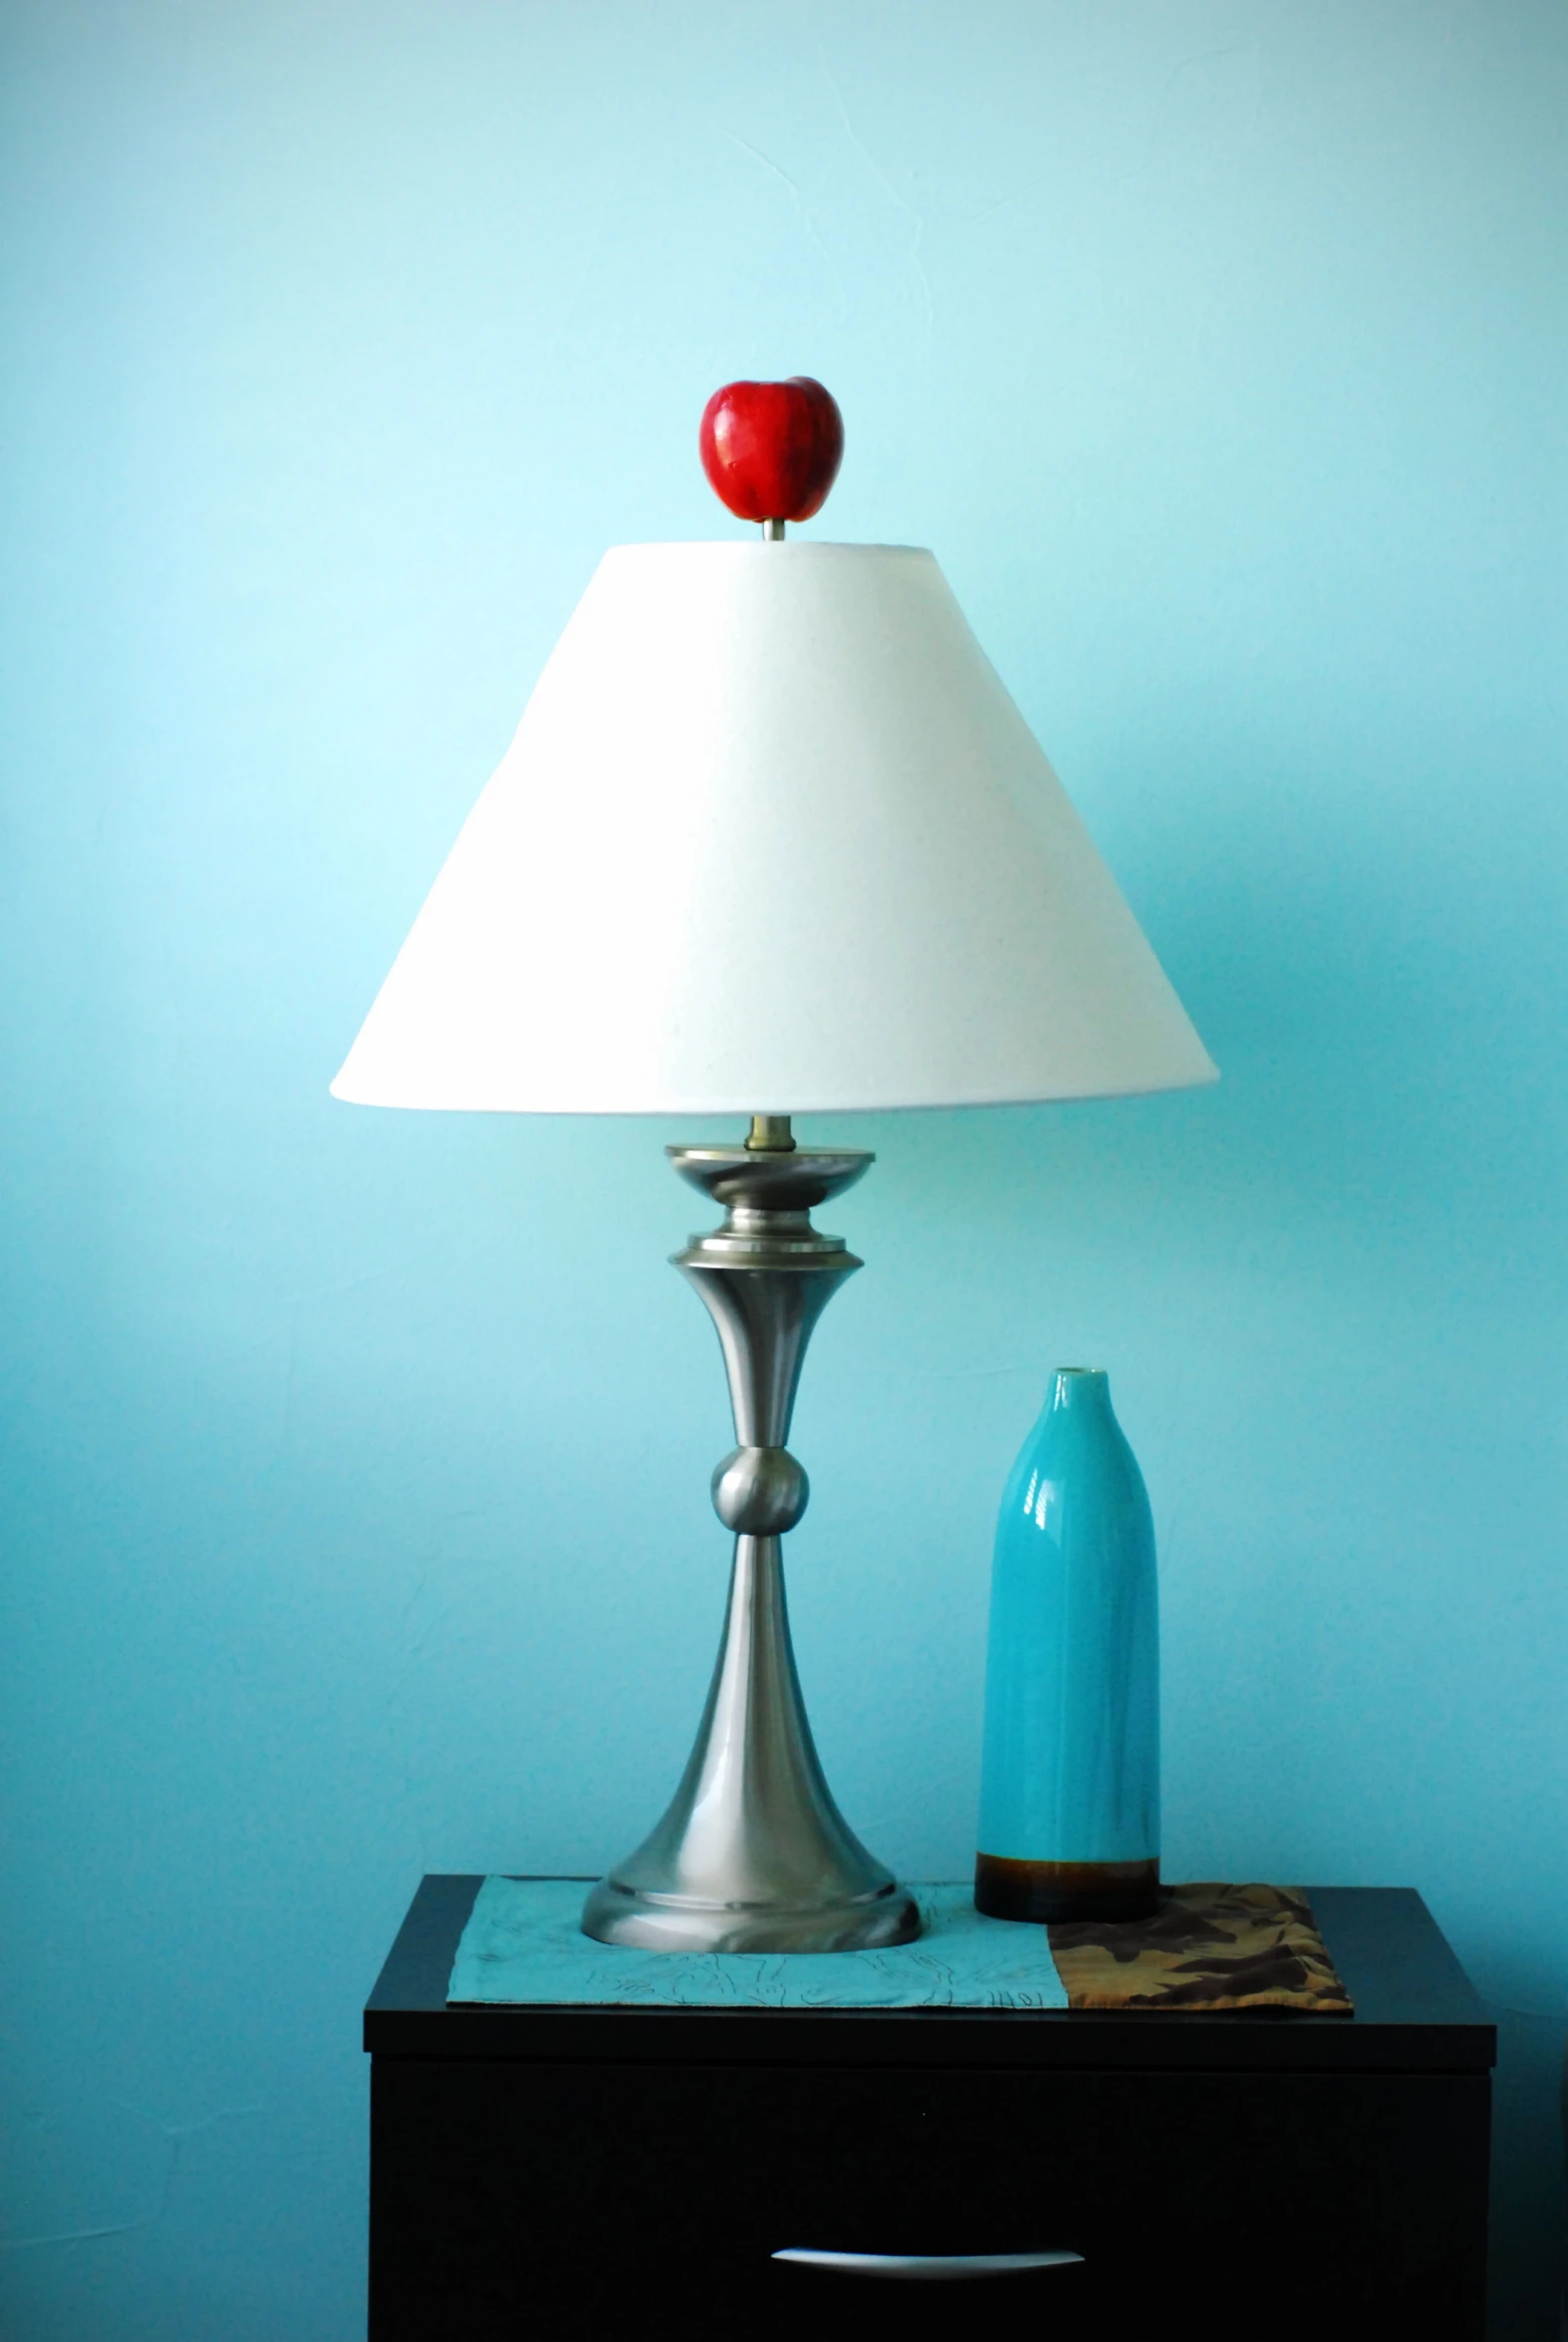 a light blue cabinet with a silver lamp and red apple on top